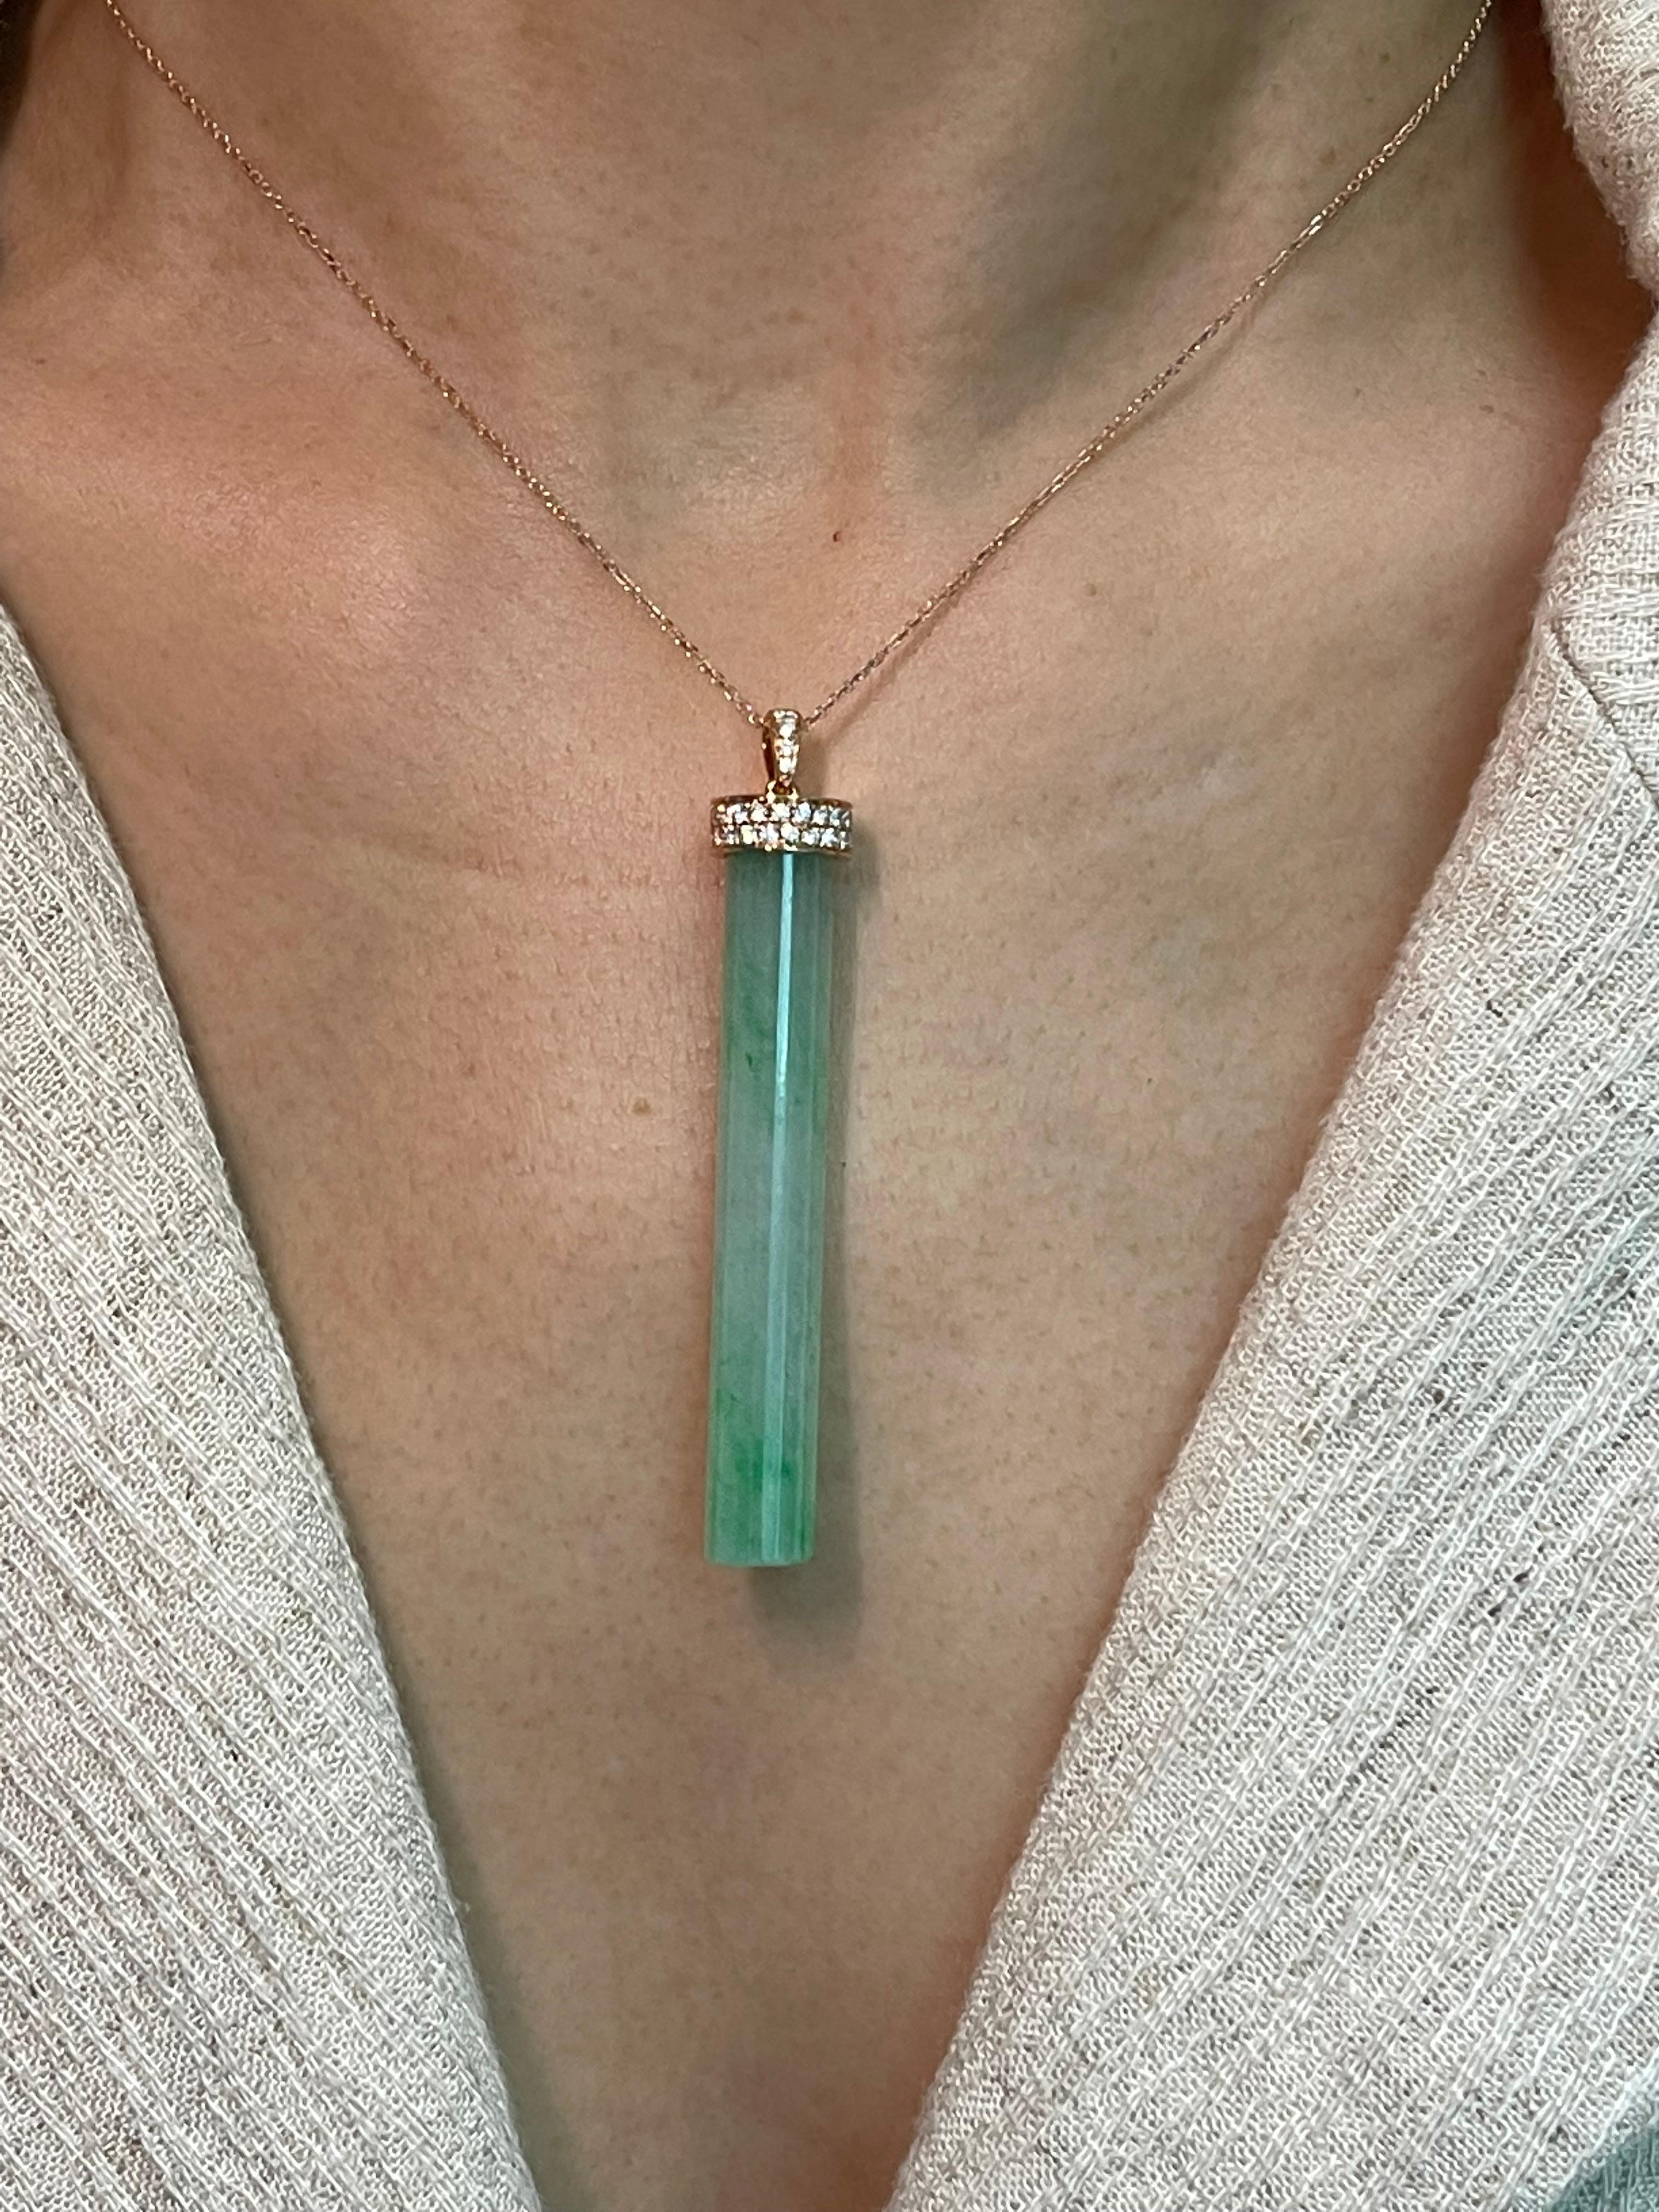 This is certified to be natural jadeite. Icy transparent jade. The pendant is set in 18k rose gold and diamonds. There are a total of 0.42 cts of diamonds in this setting. In jadeite jade 2 main features determines the price 1) the saturation of